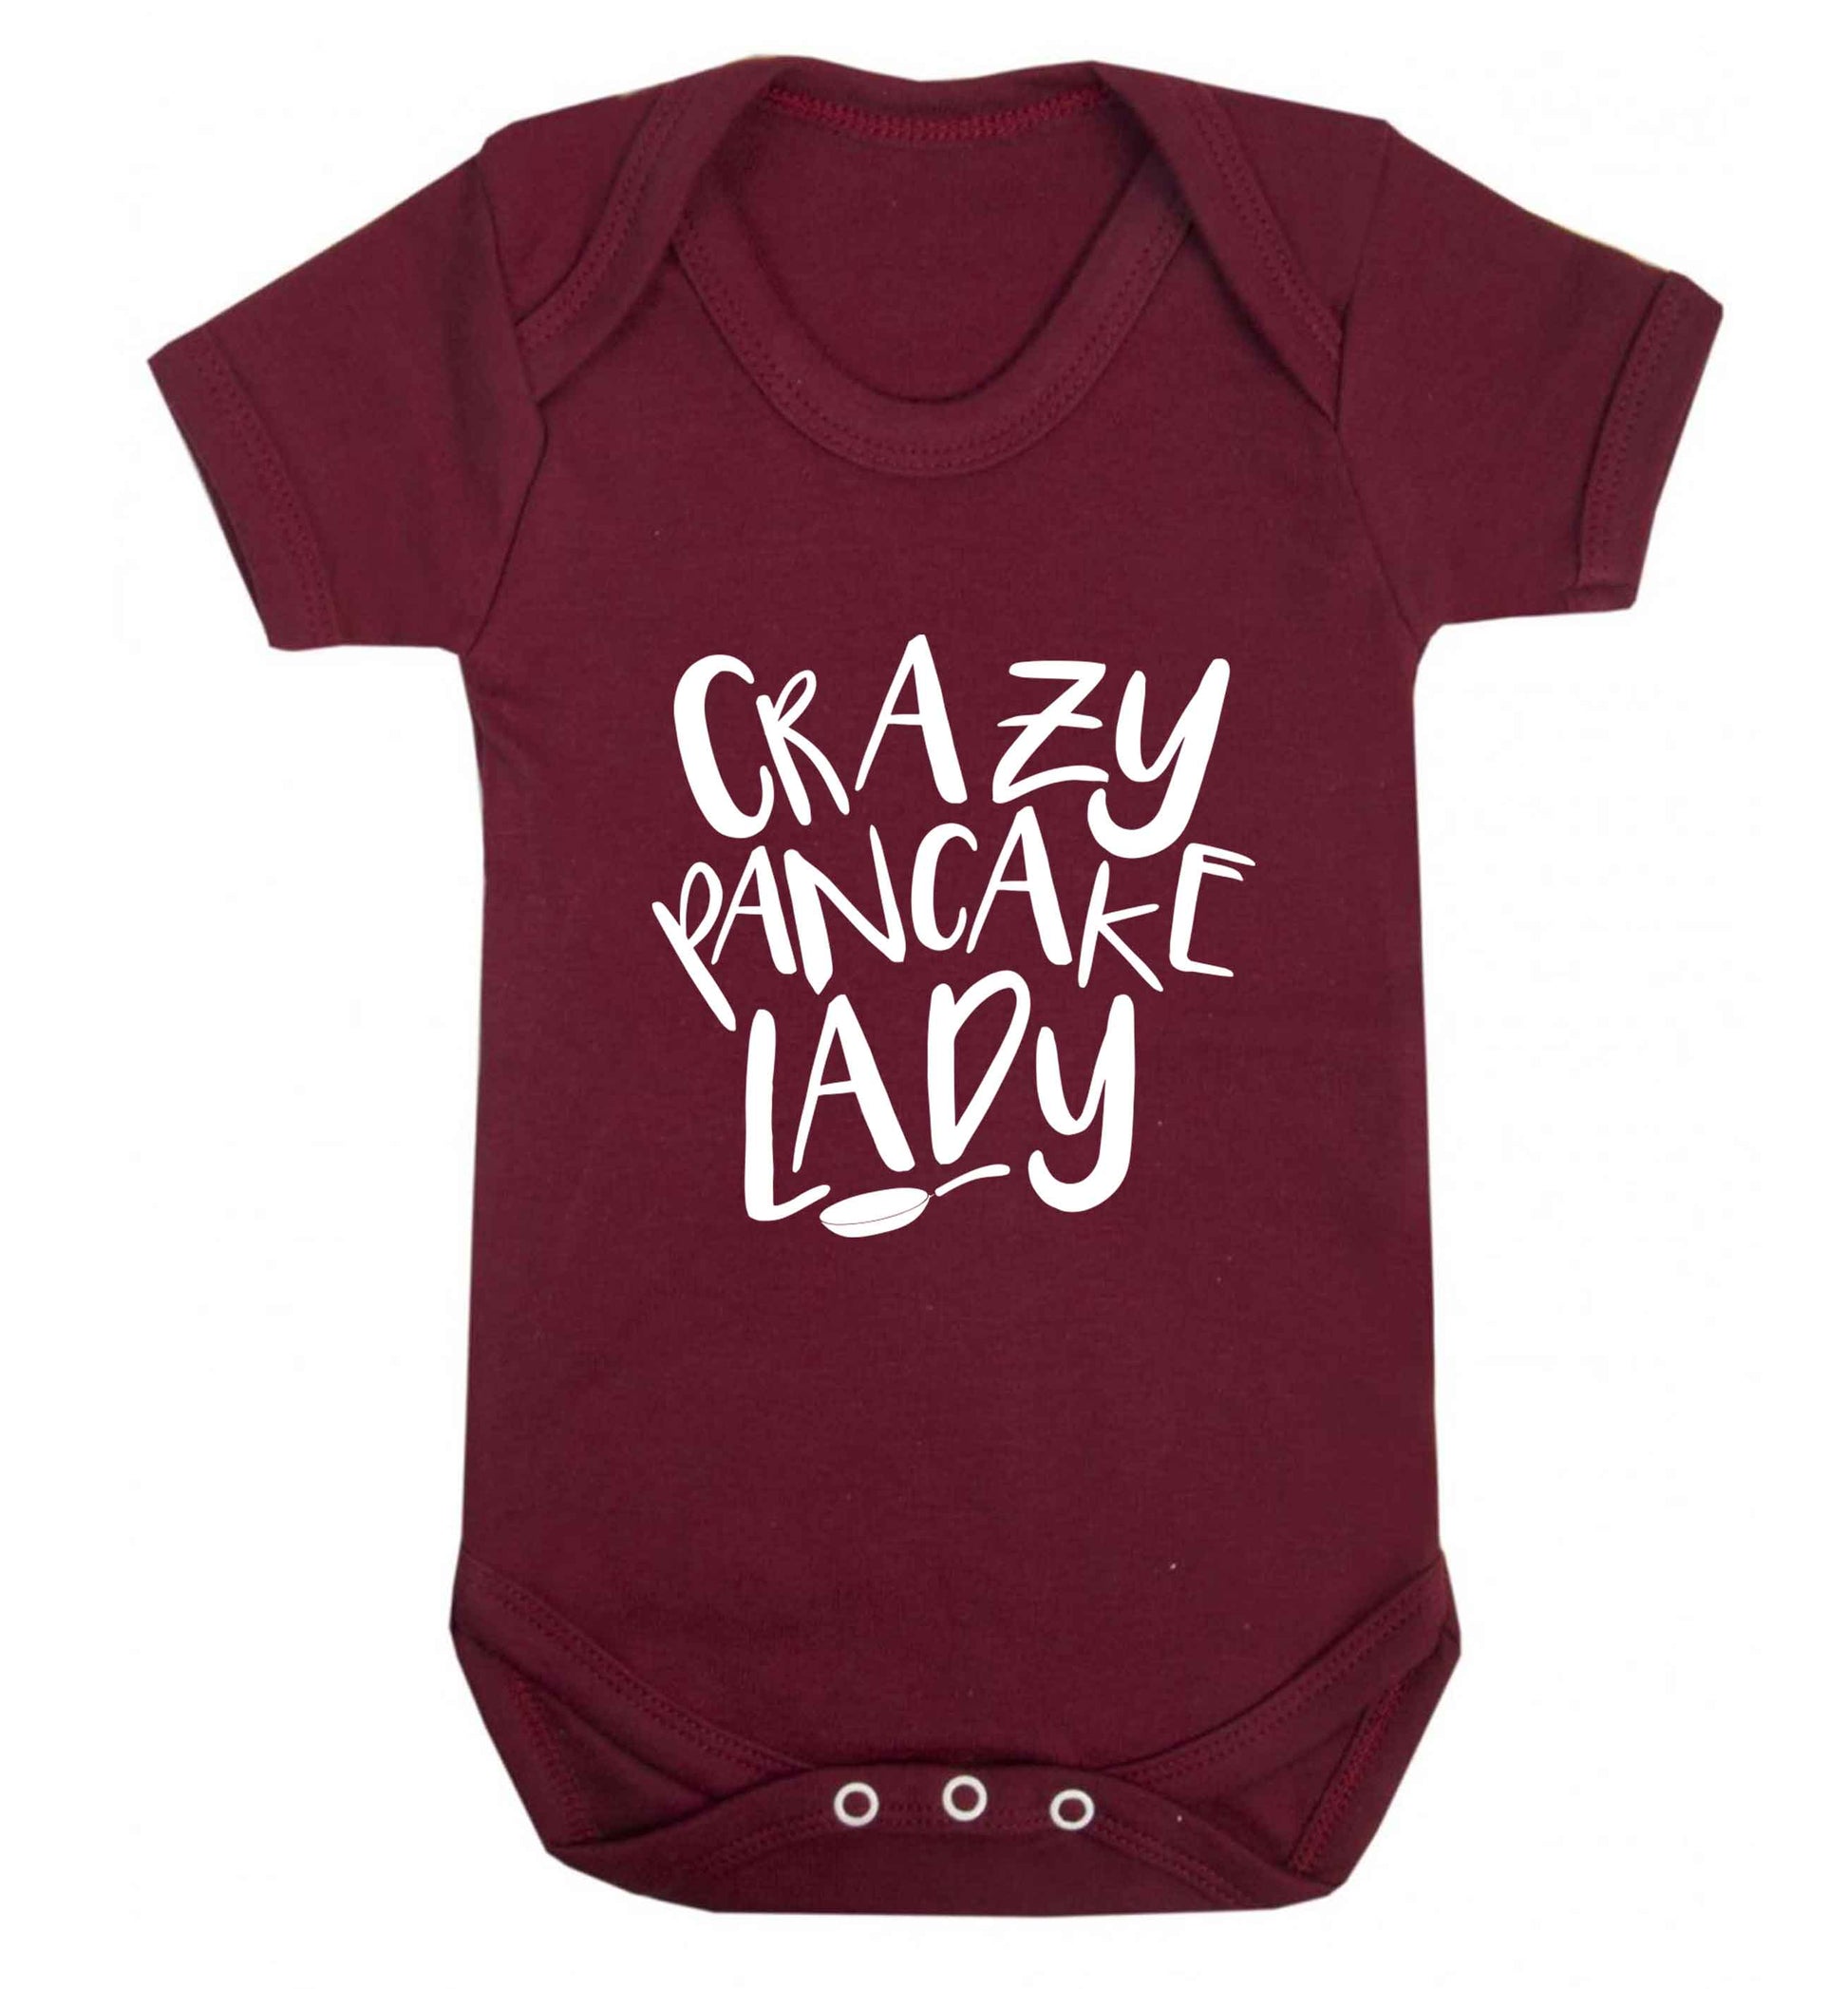 Crazy pancake lady baby vest maroon 18-24 months